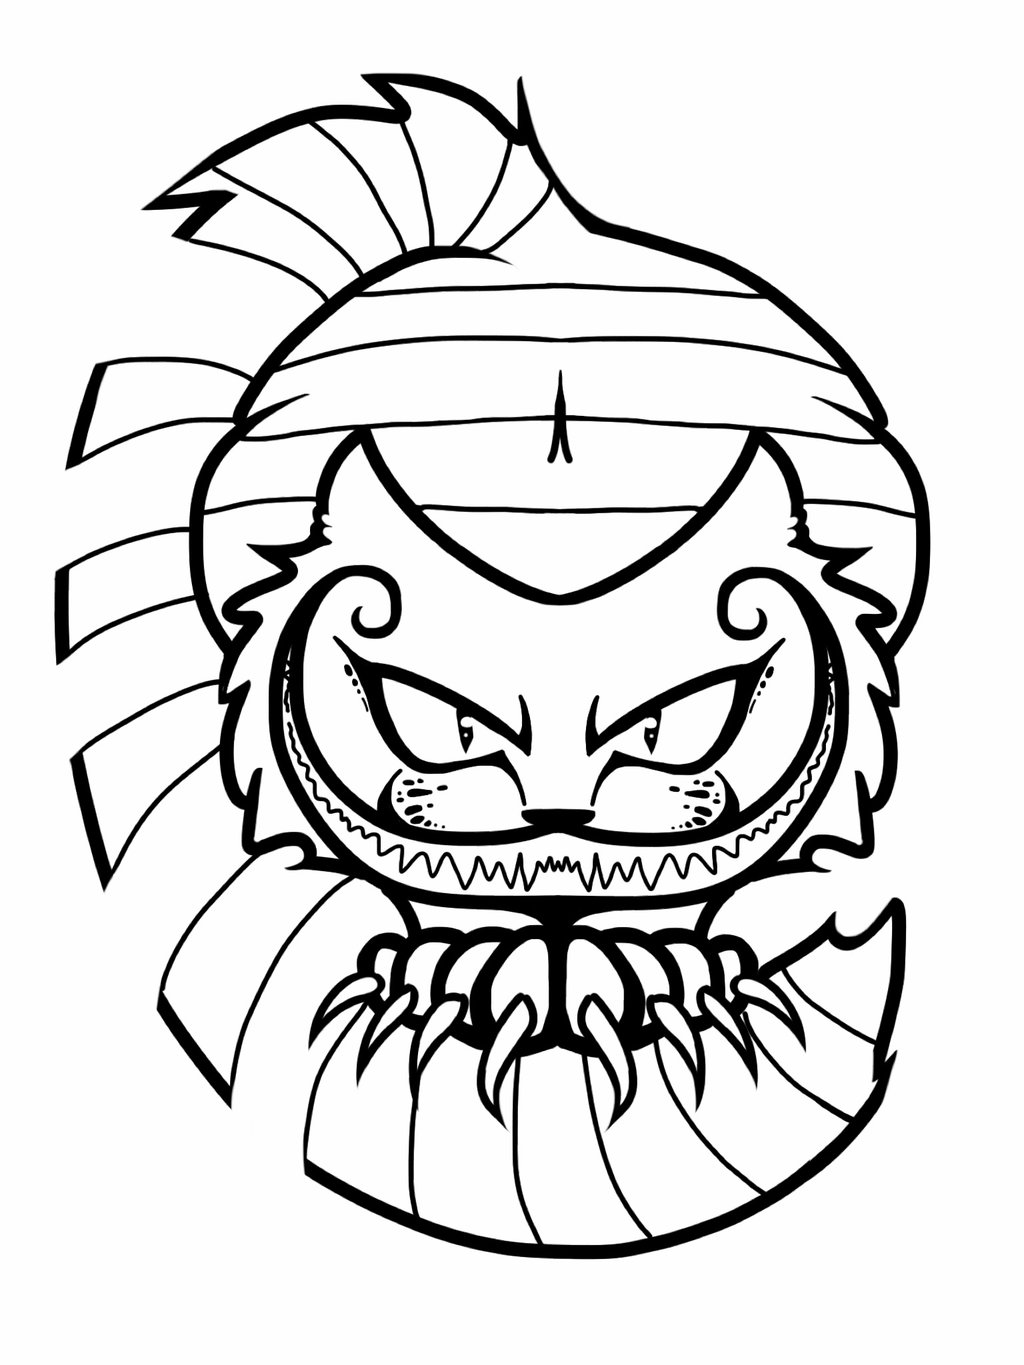 Evil uncolored cheshire cat tattoo design by Valerie of Doom